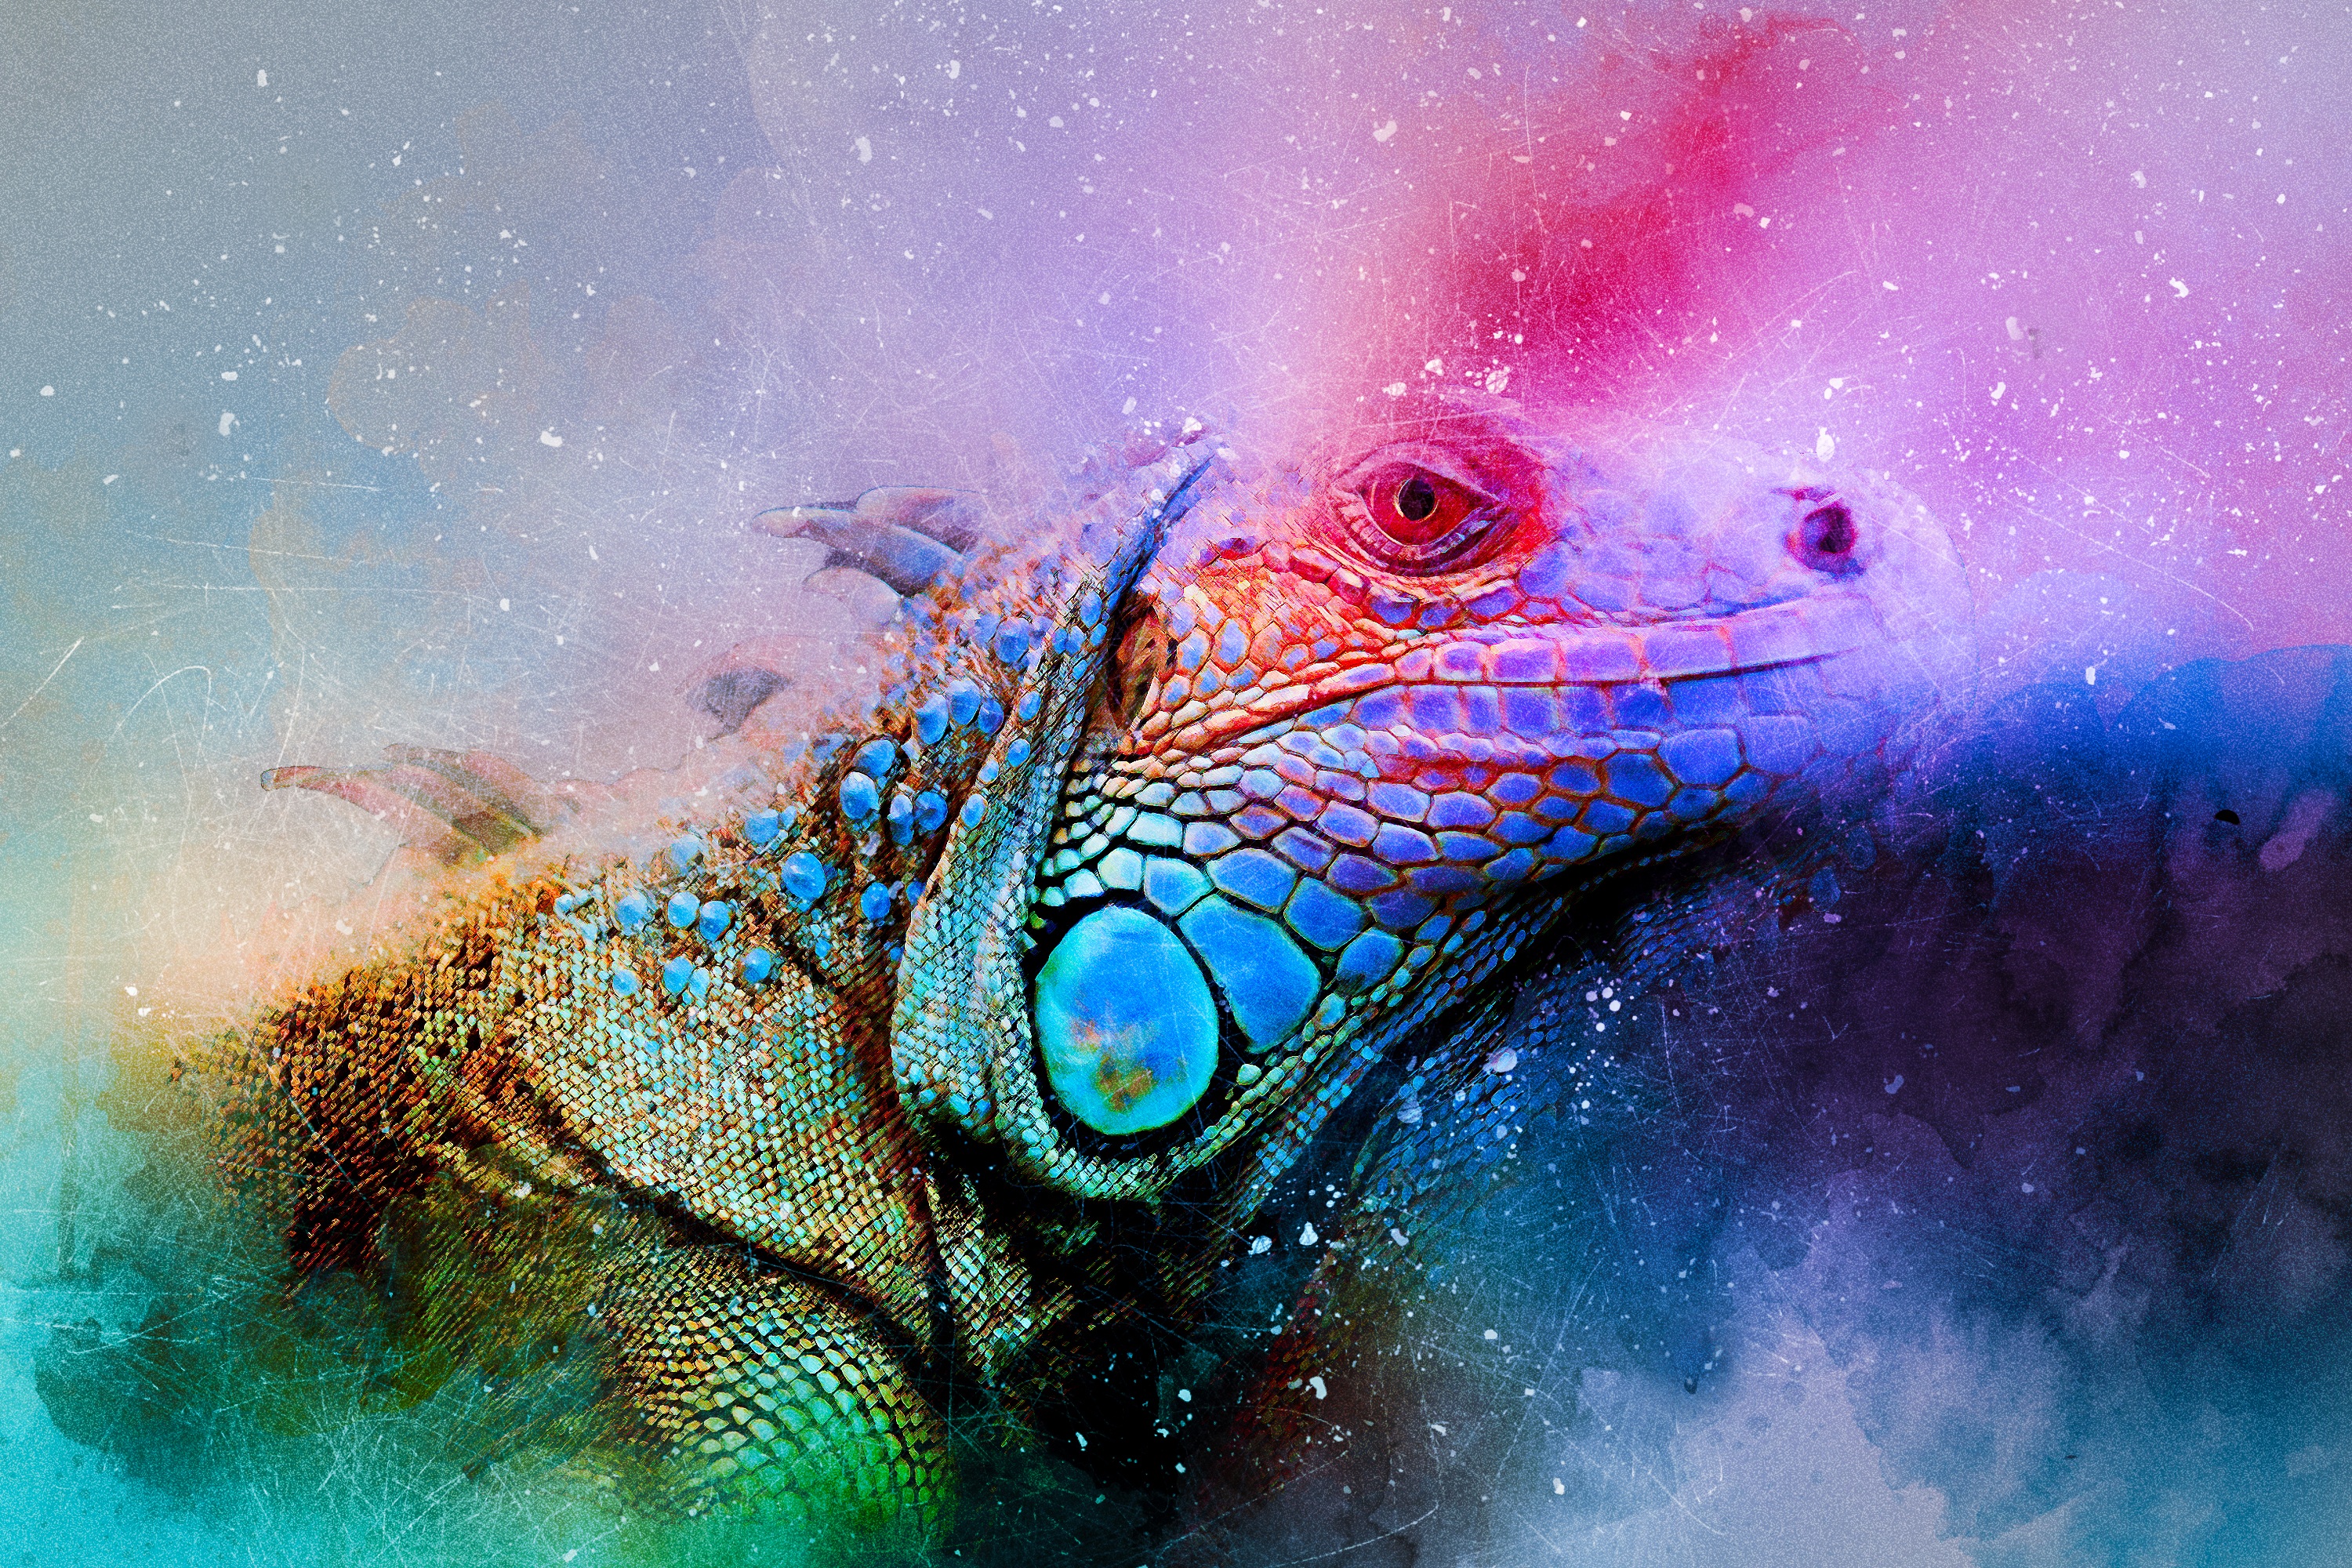 153045 free wallpaper 320x480 for phone, download images iguana, reptile, colourful, colorful 320x480 for mobile